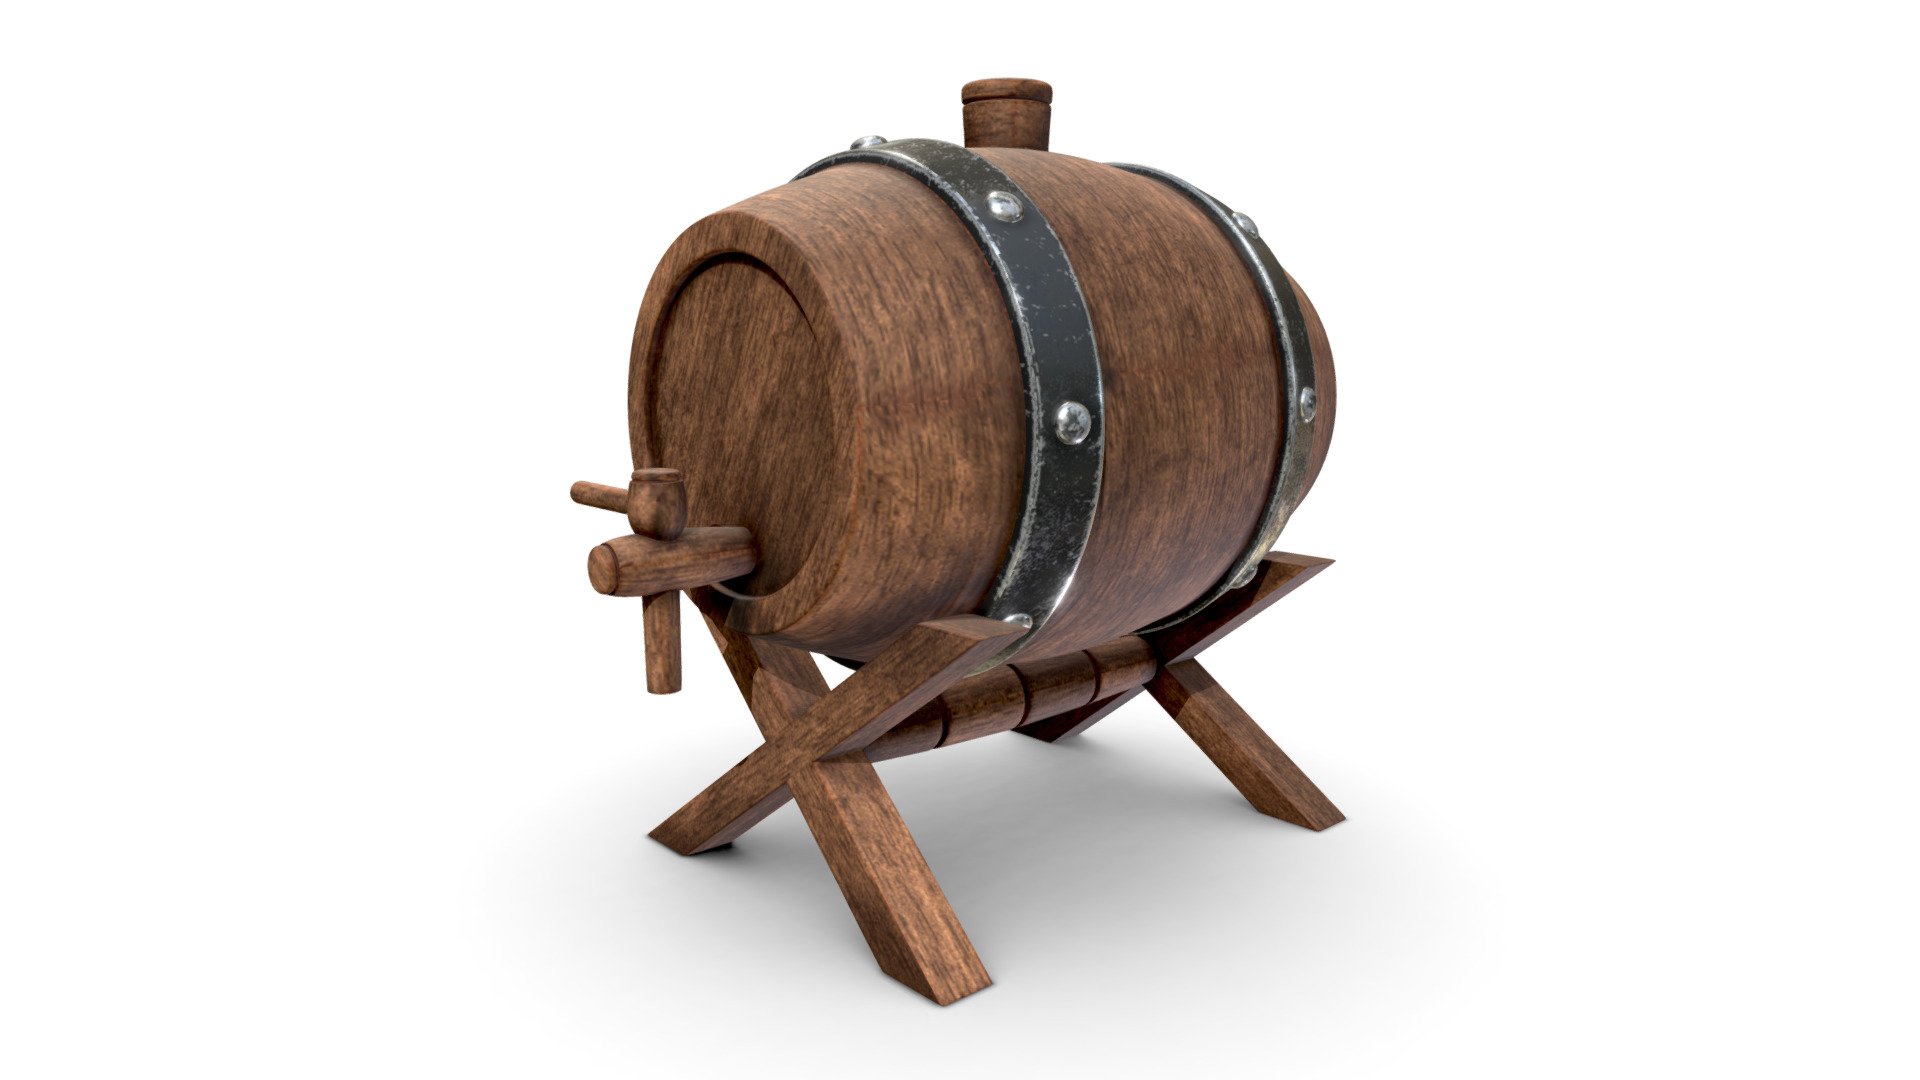 A wine barrel, made for the 3D modeling course I'm teaching 3d model